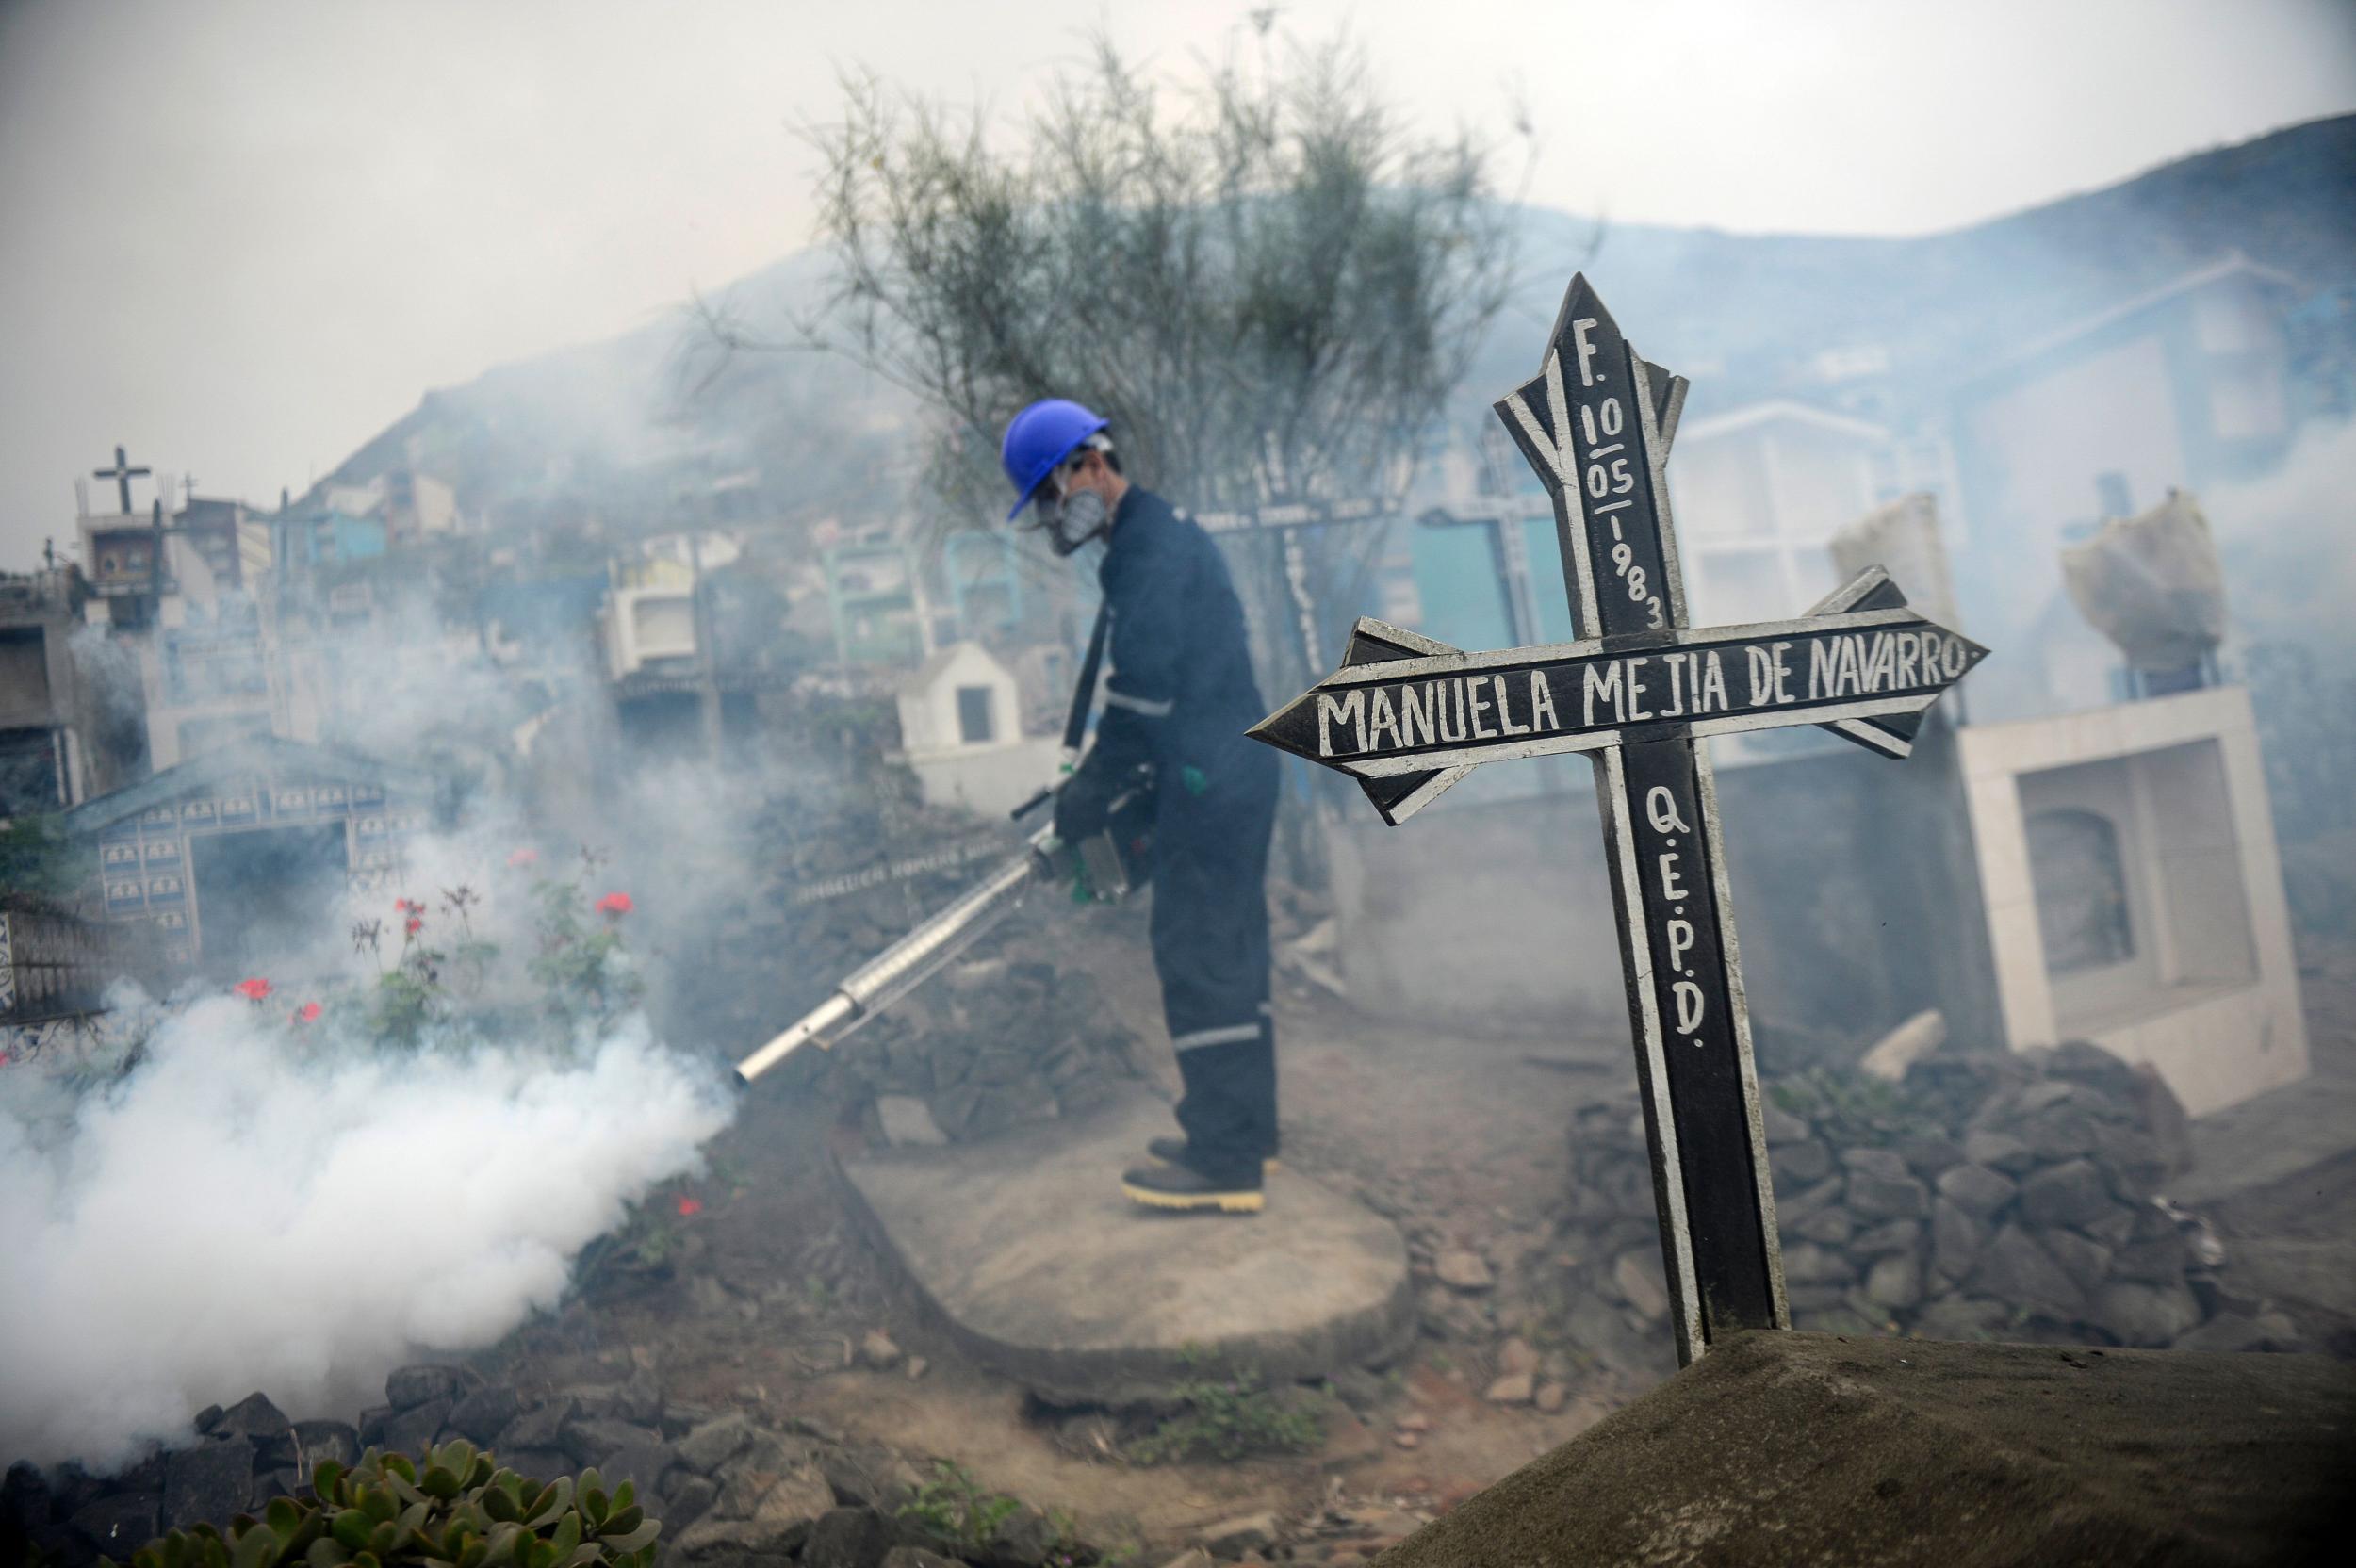 A specialist fumigates a cemetery in Lima, Peru, in an effort to stop the spread of the dangerous Zika virus